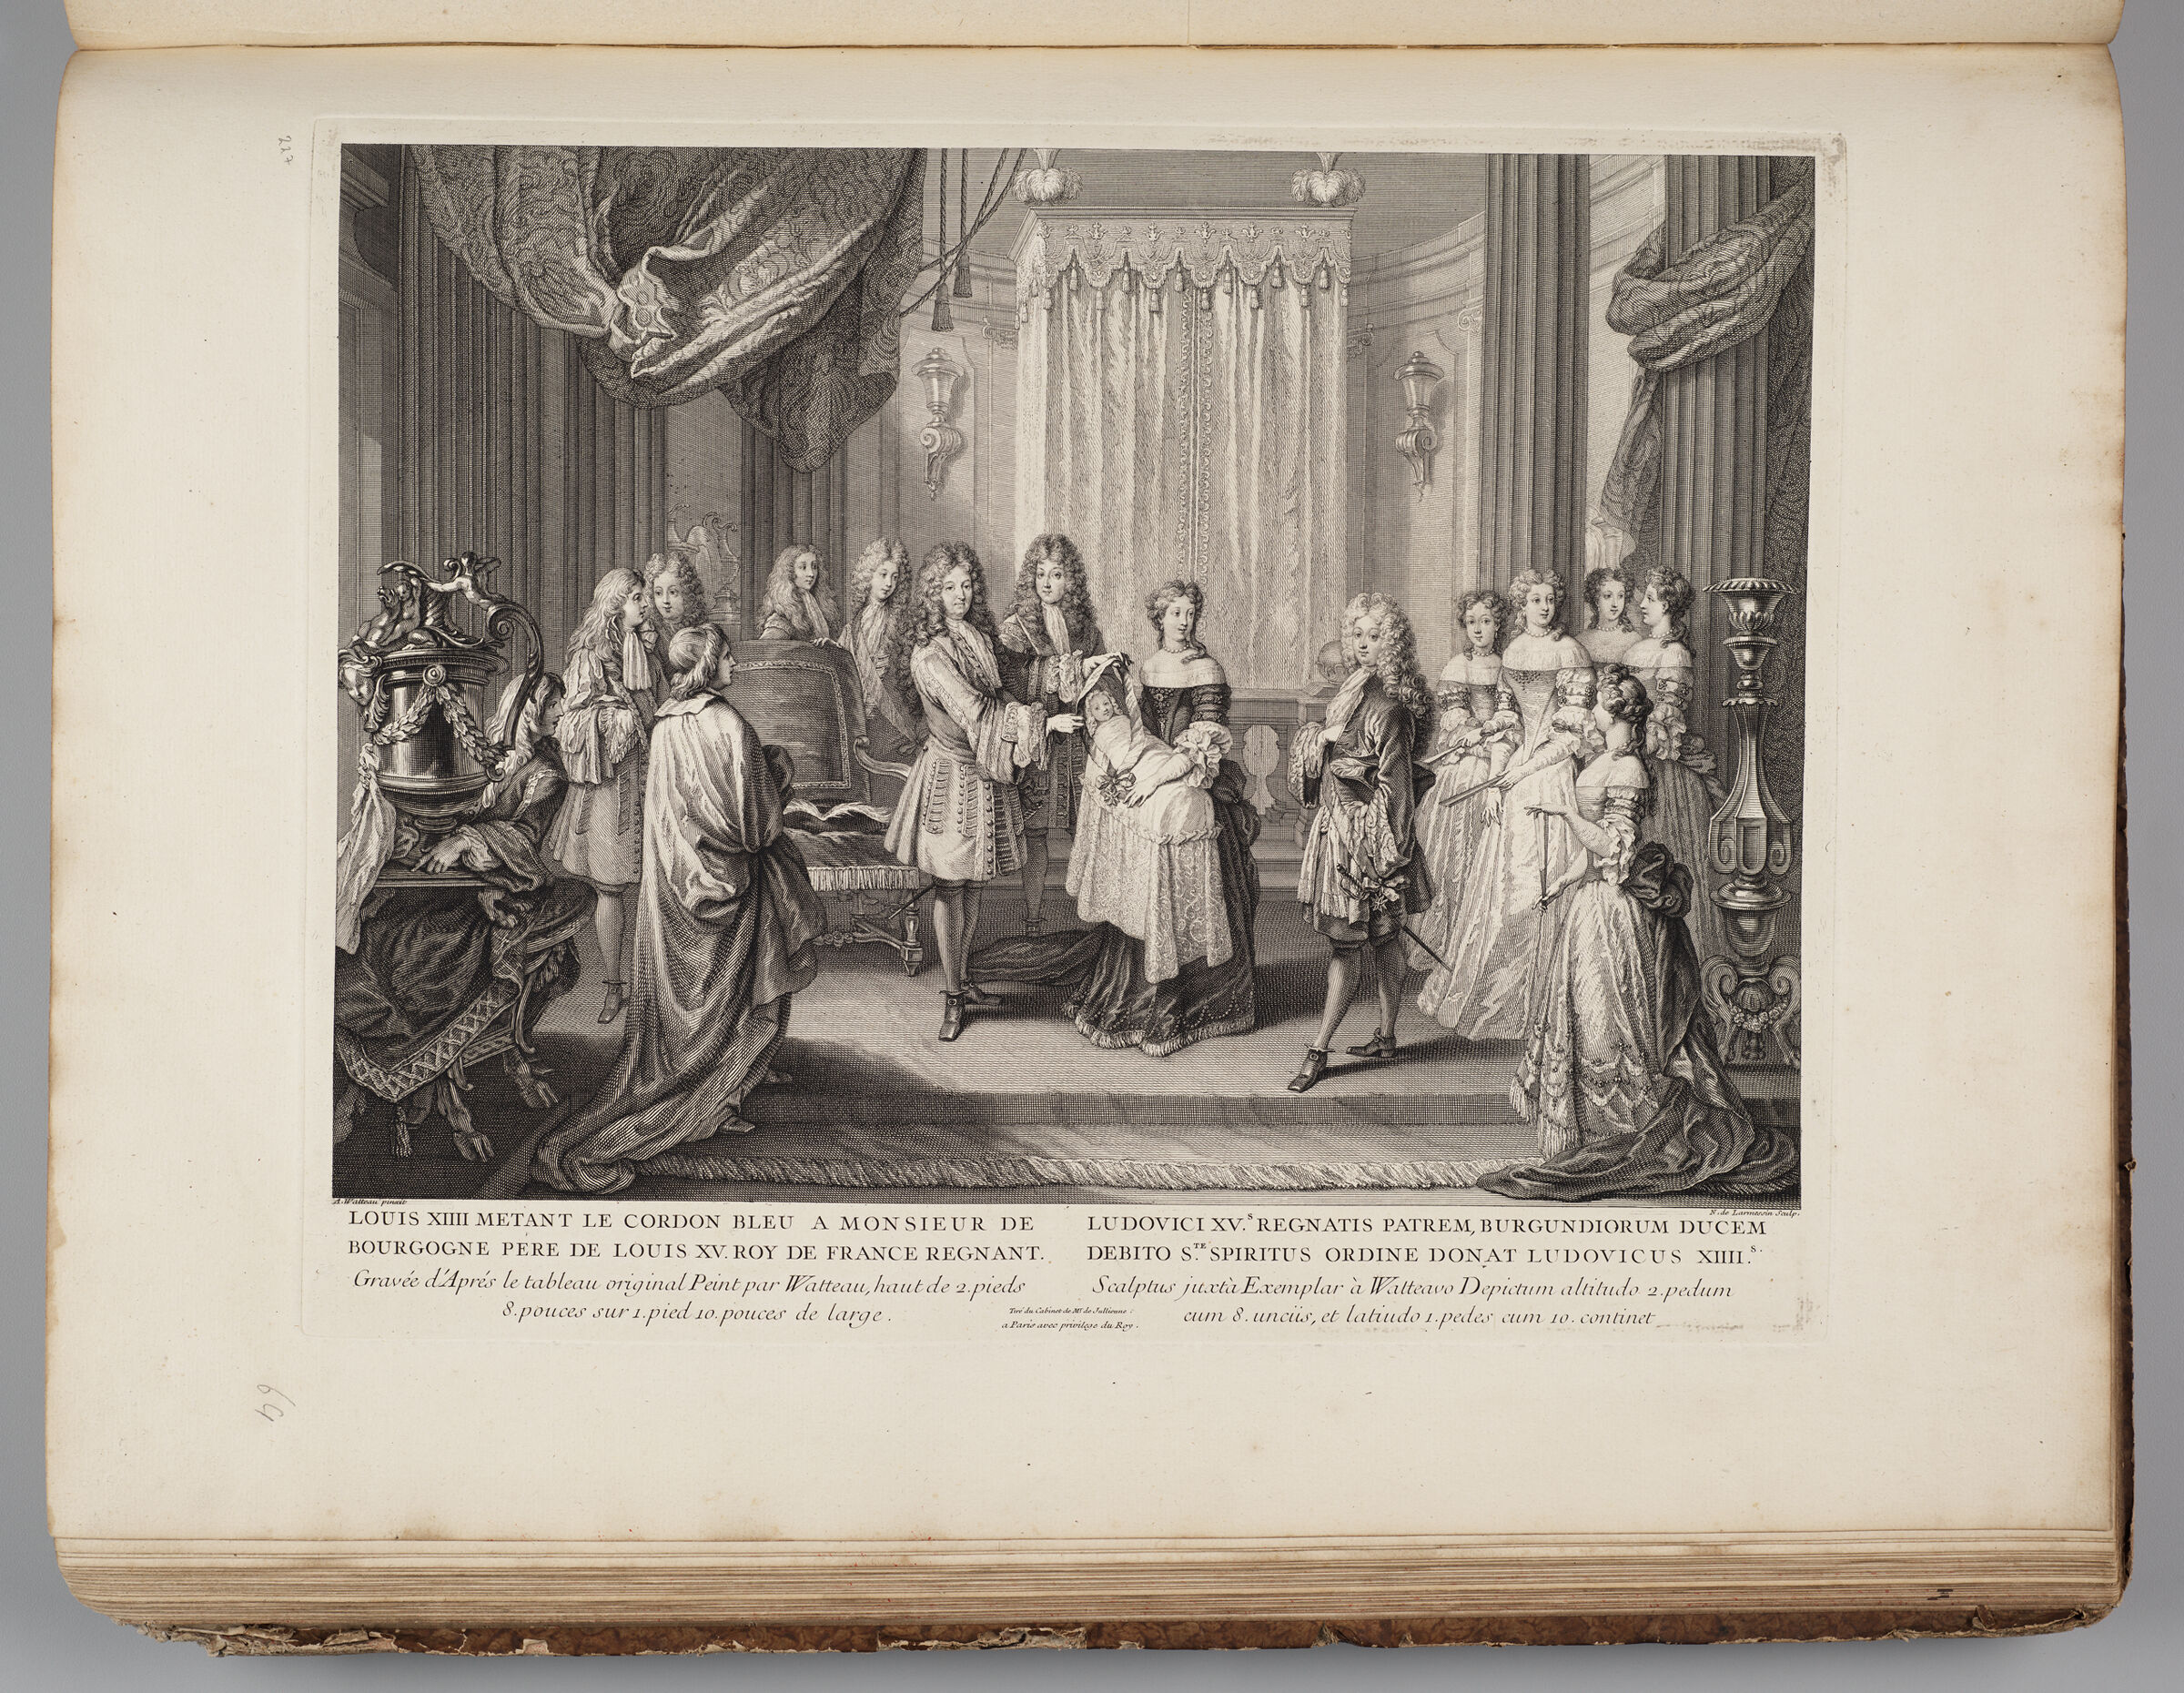 Louis Xiv Awarding The Blue Ribbon Of The Order Of The Holy Spirit To The Duke Of Burgundy, Father Of Louis Xv, The Reigning King Of France
